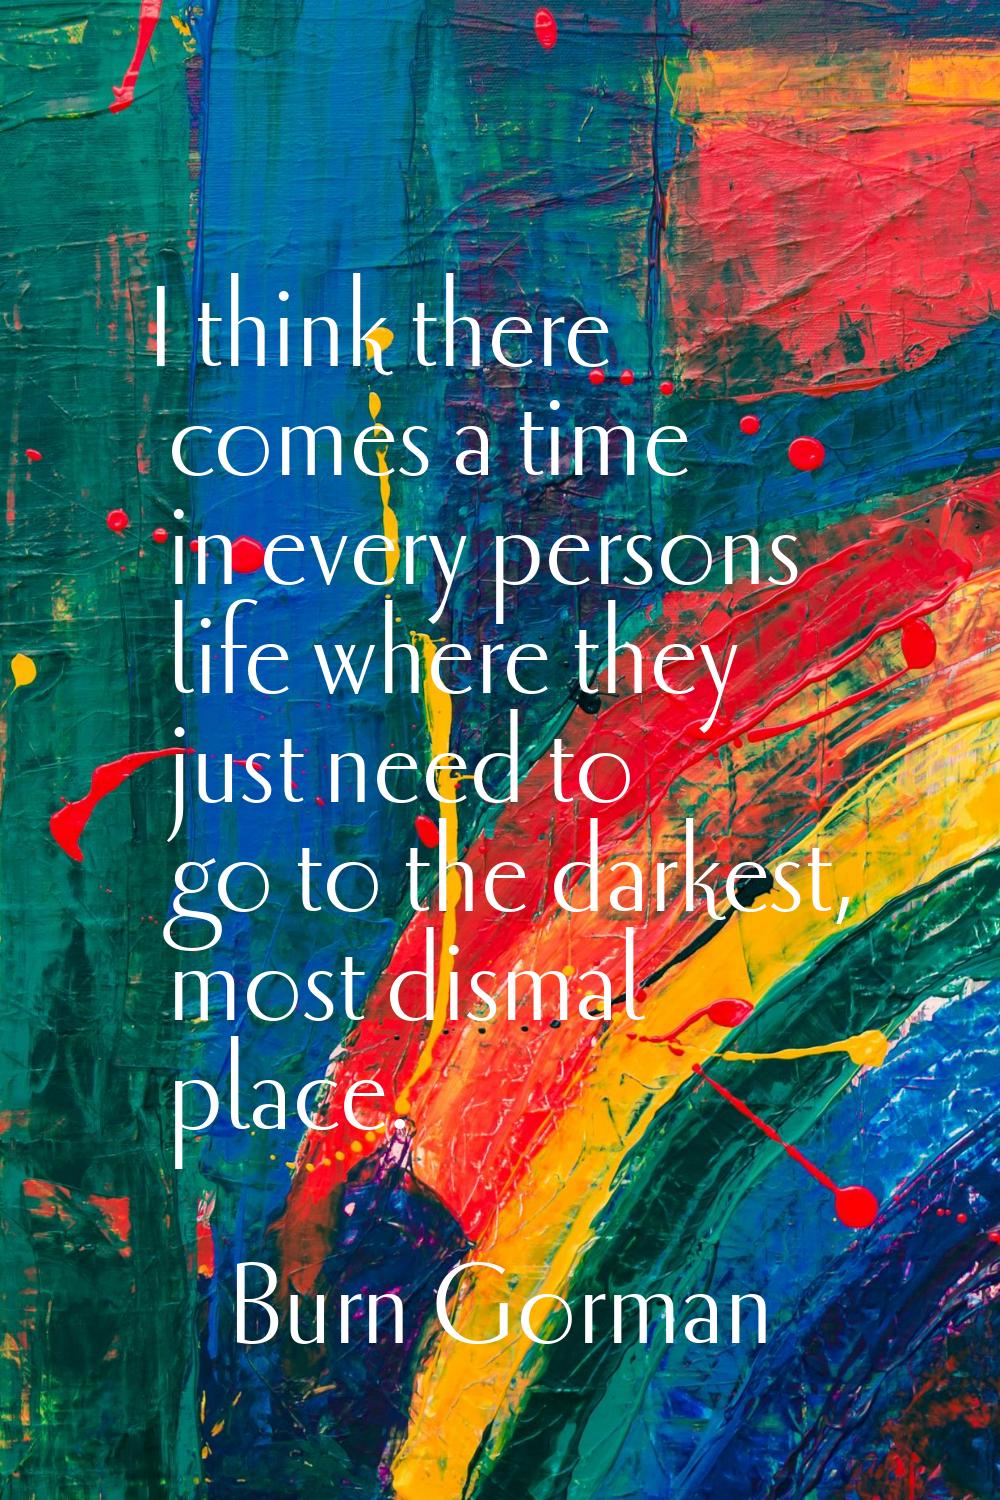 I think there comes a time in every persons life where they just need to go to the darkest, most di